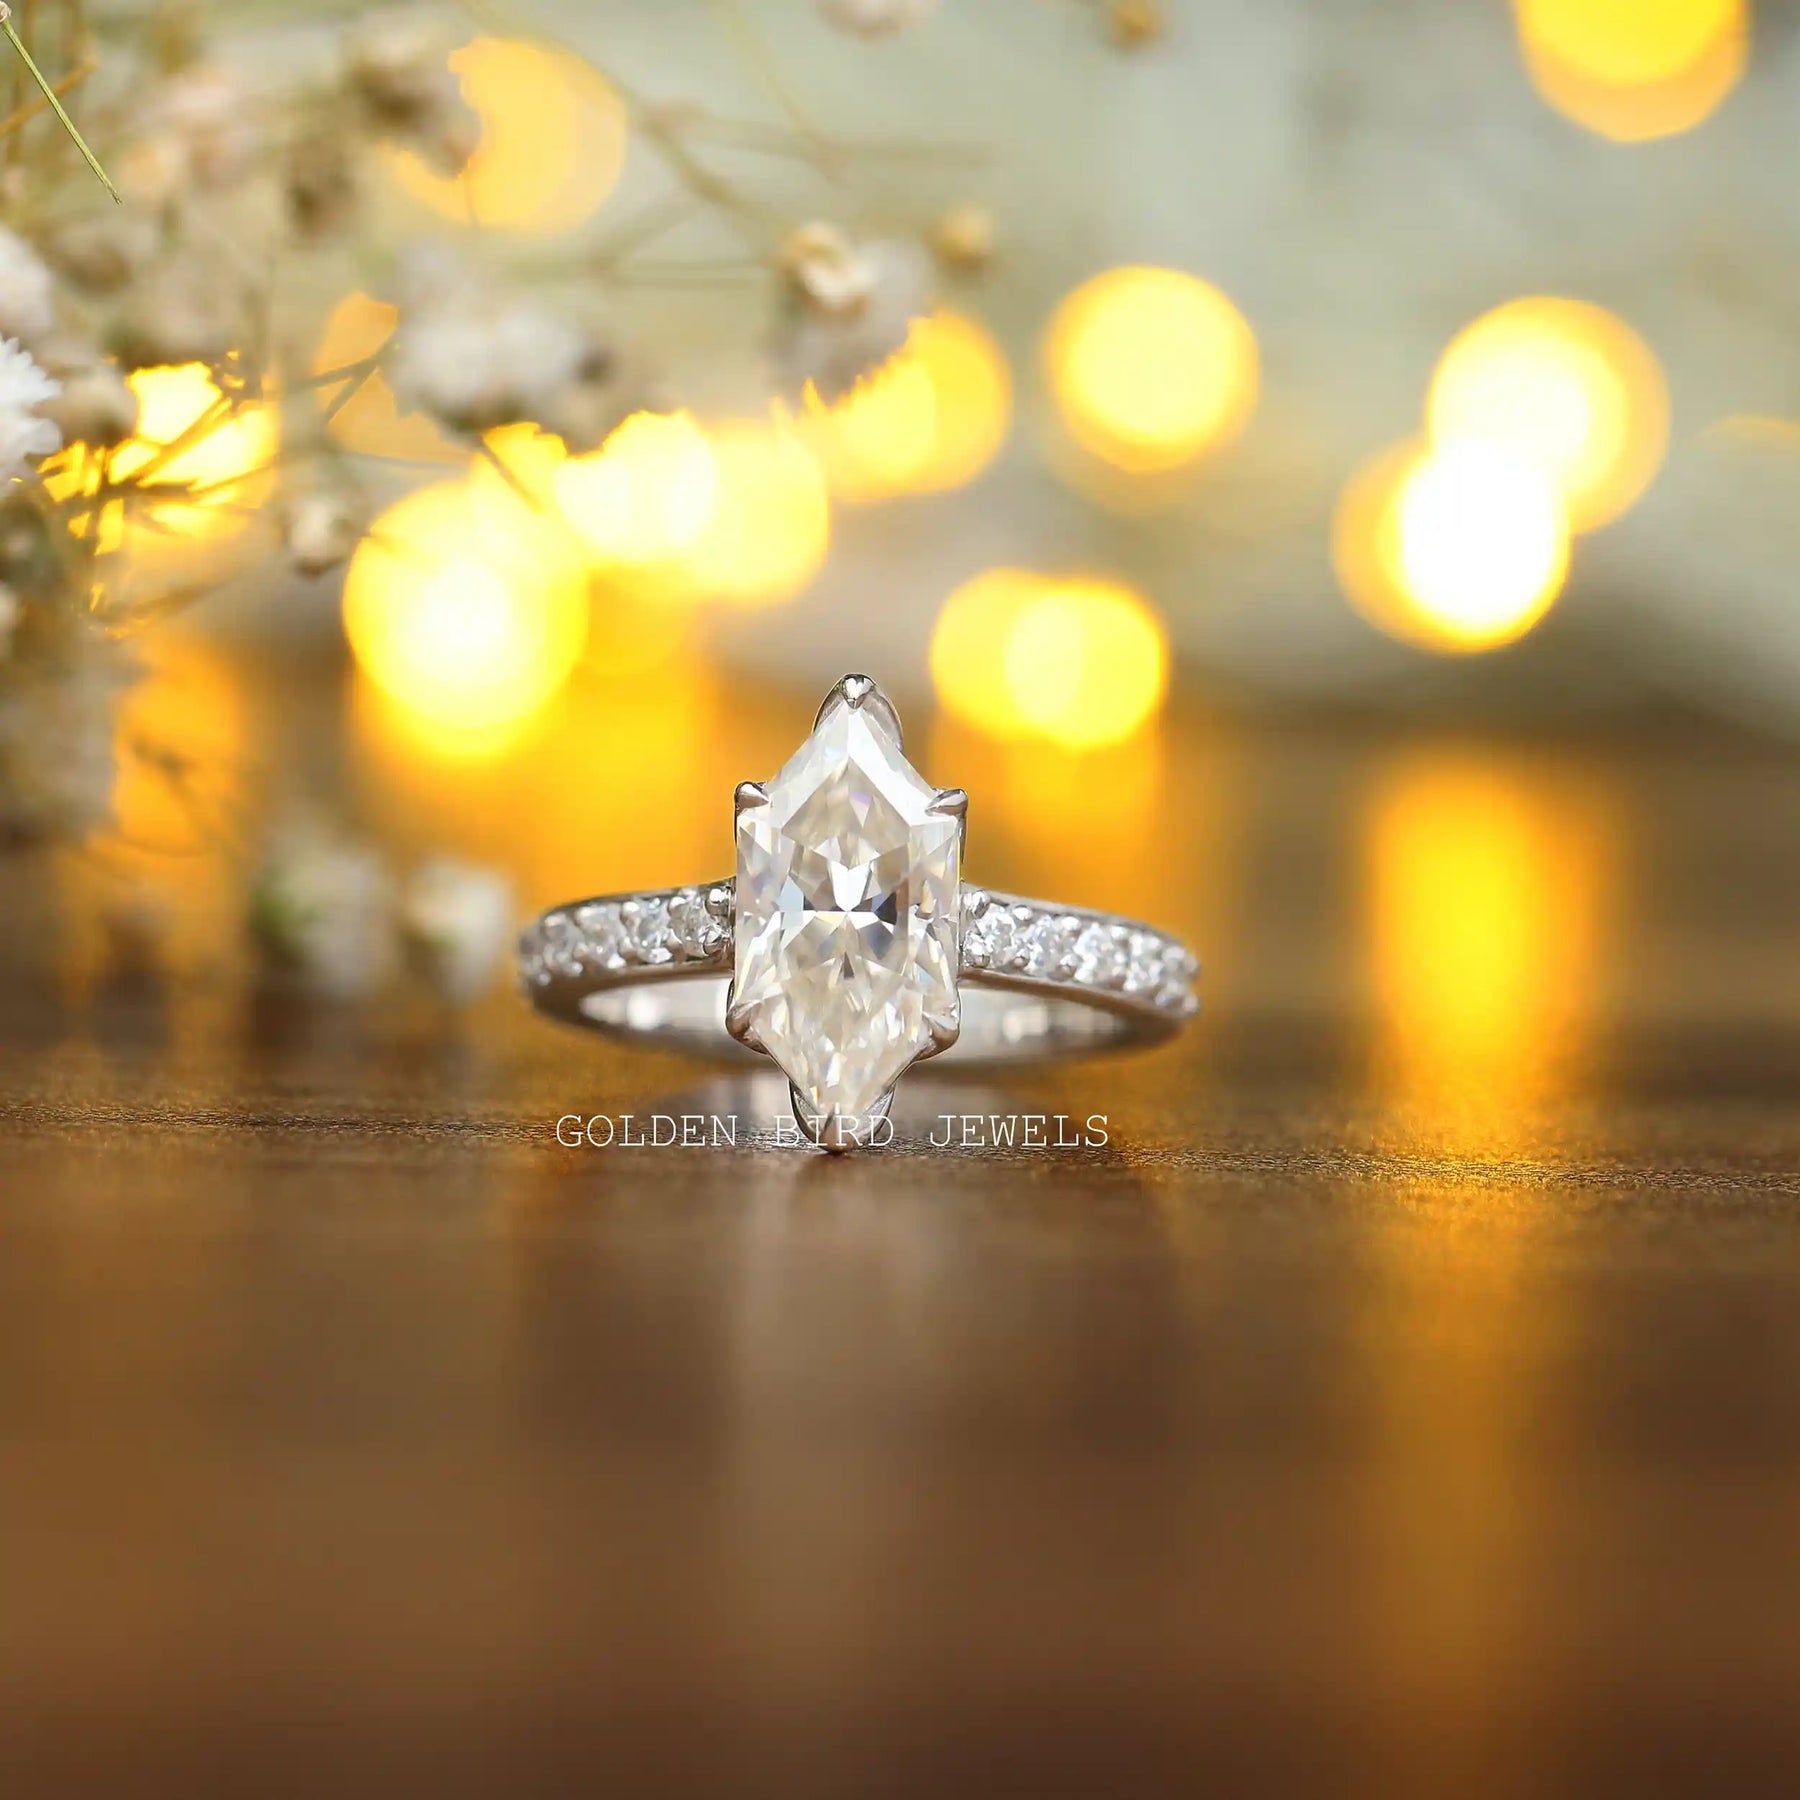 [Colorless Dutch Marquise Cut Moissanite Accent Stone Engagement Ring]-[Golden Bird Jewels]